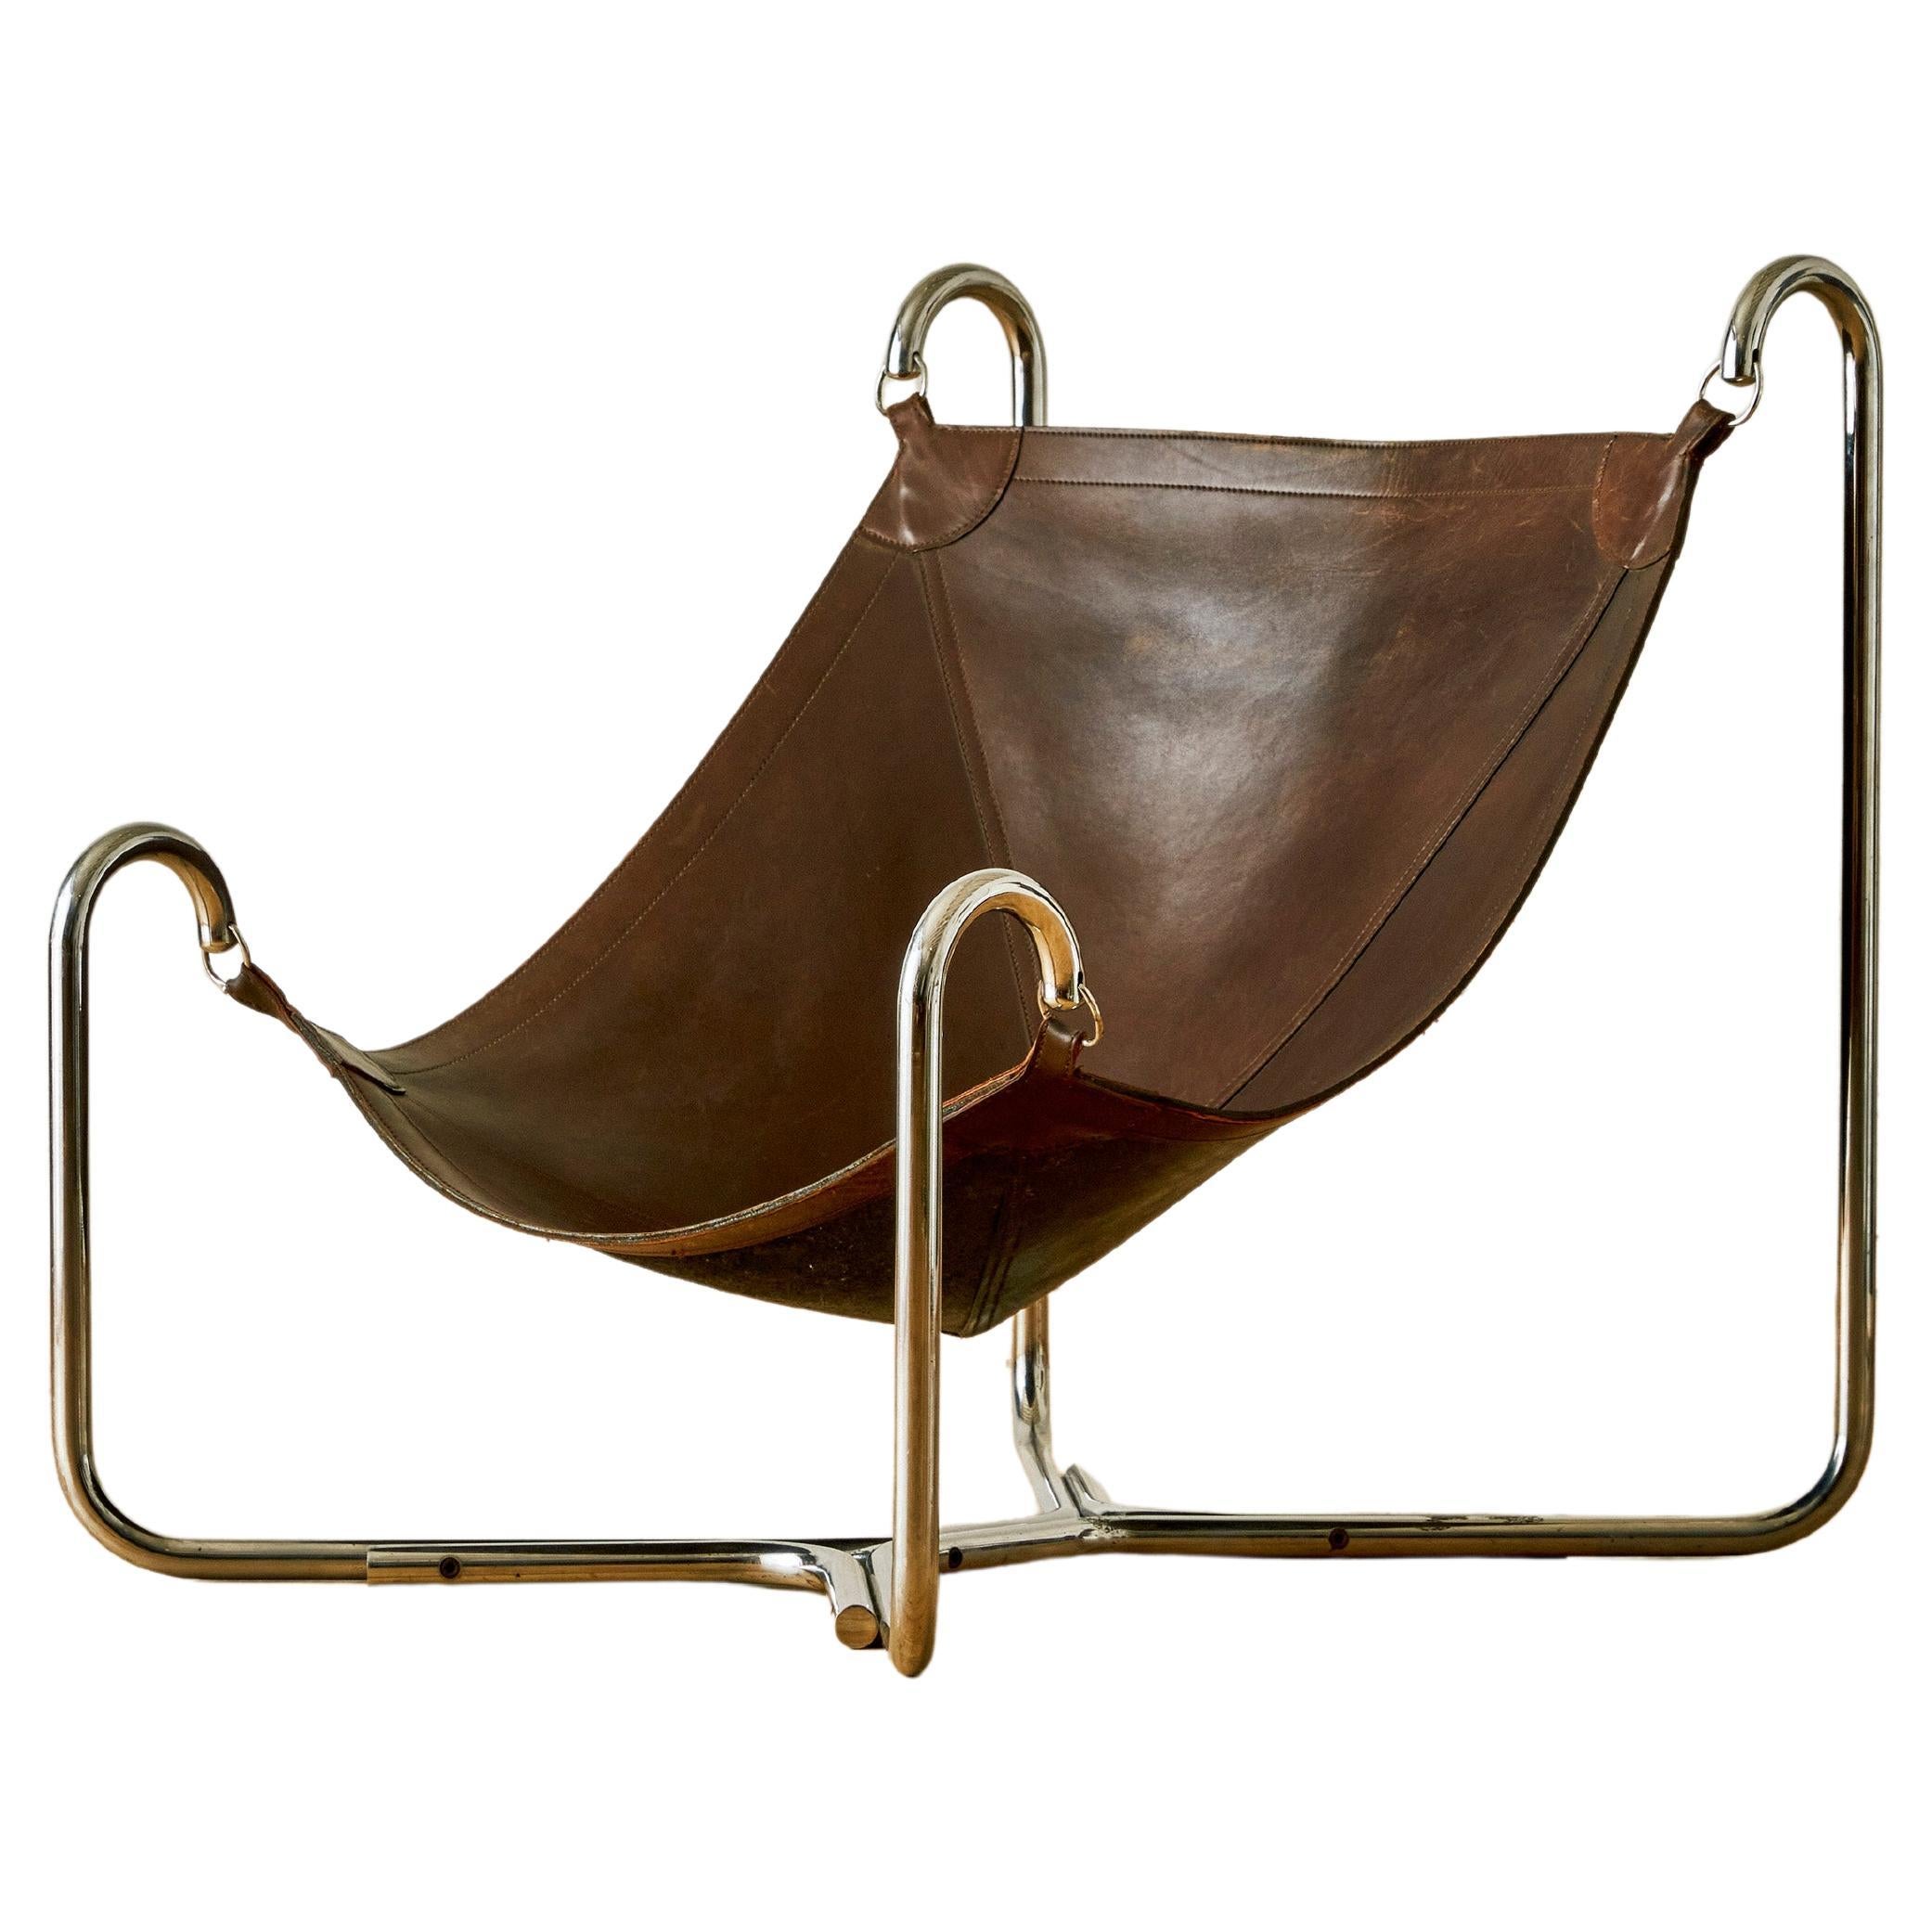 Baffo armchair by Gianni Pareschi and Ezio Didoni for Dam, by Busnelli For Sale